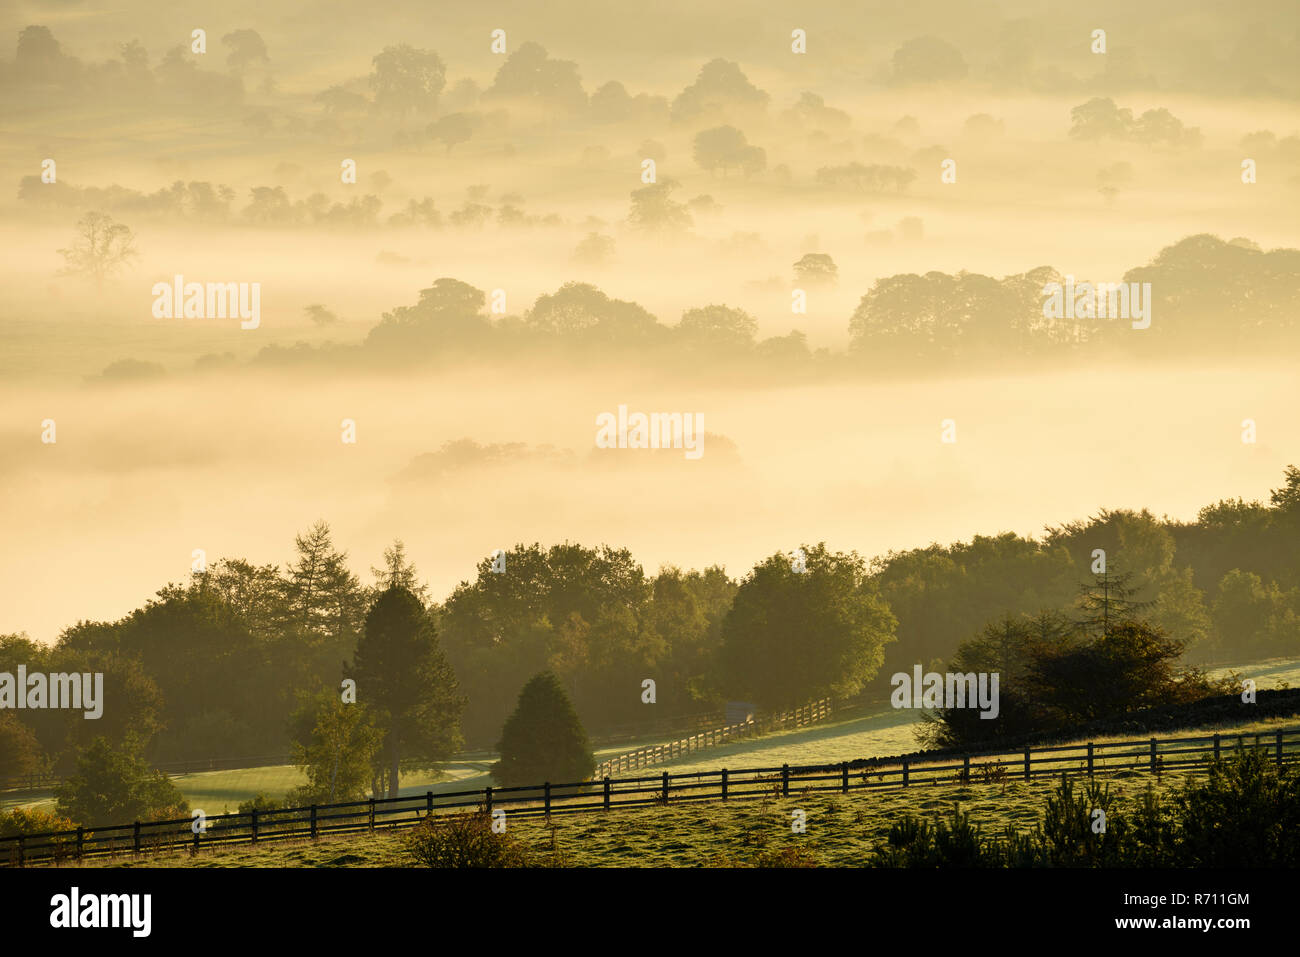 Long-distance, foggy, early morning view over scenic rural Wharfedale, the valley shrouded in mist or fog - near Ilkley, West Yorkshire, England, UK. Stock Photo